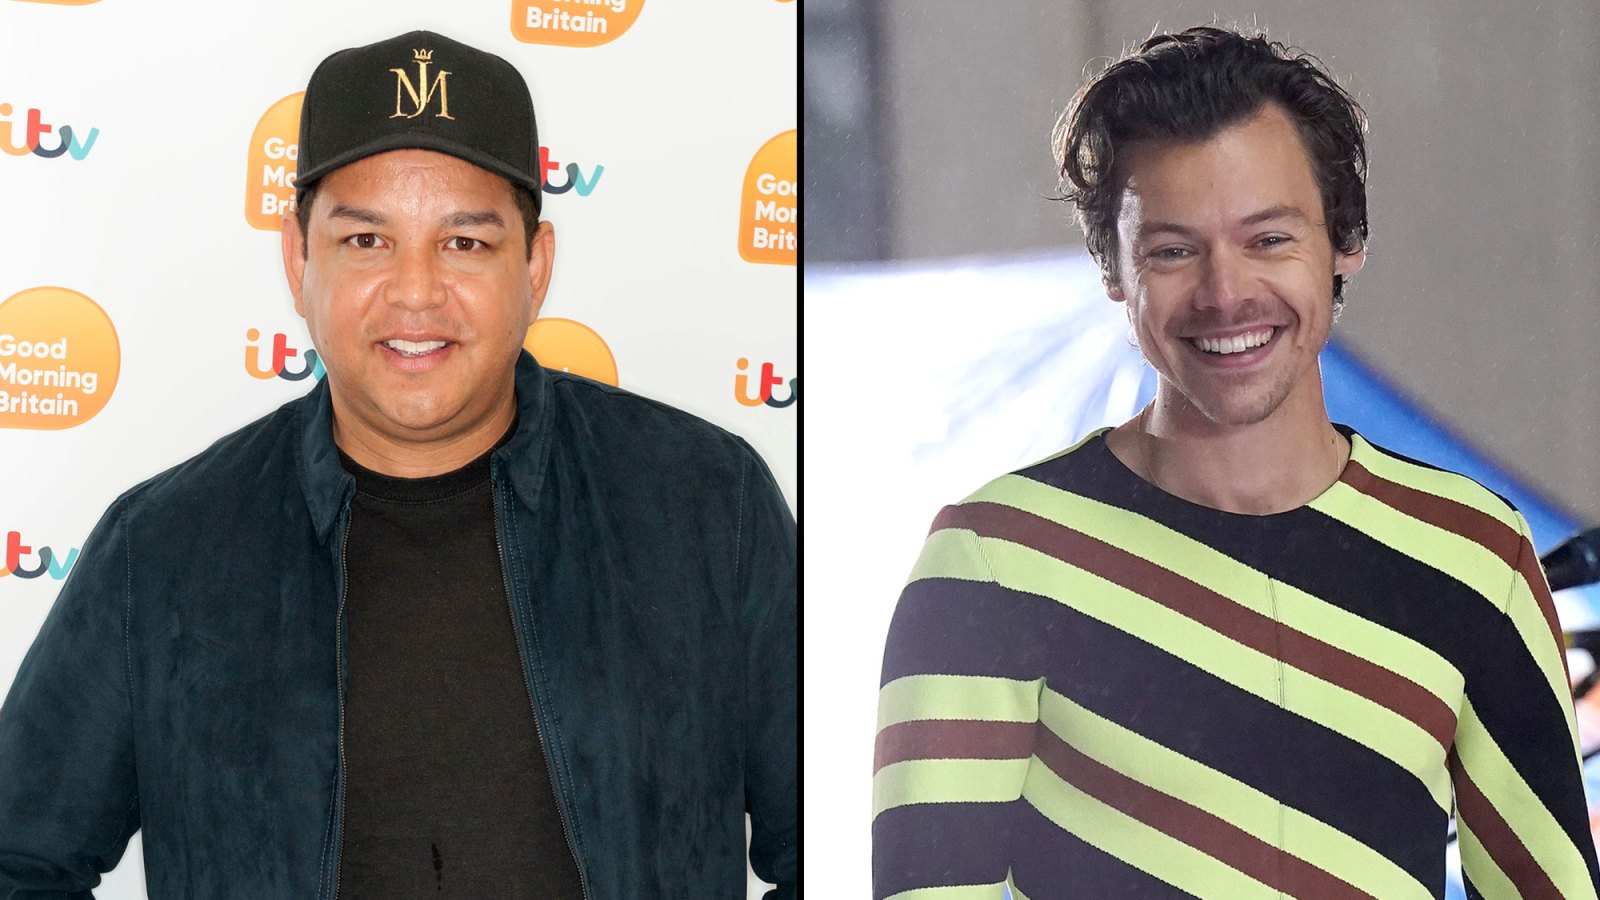 Michael Jackson's Nephew Taj Jackson Calls Out Rolling Stone for Referring to Harry Styles as the New ‘King of Pop